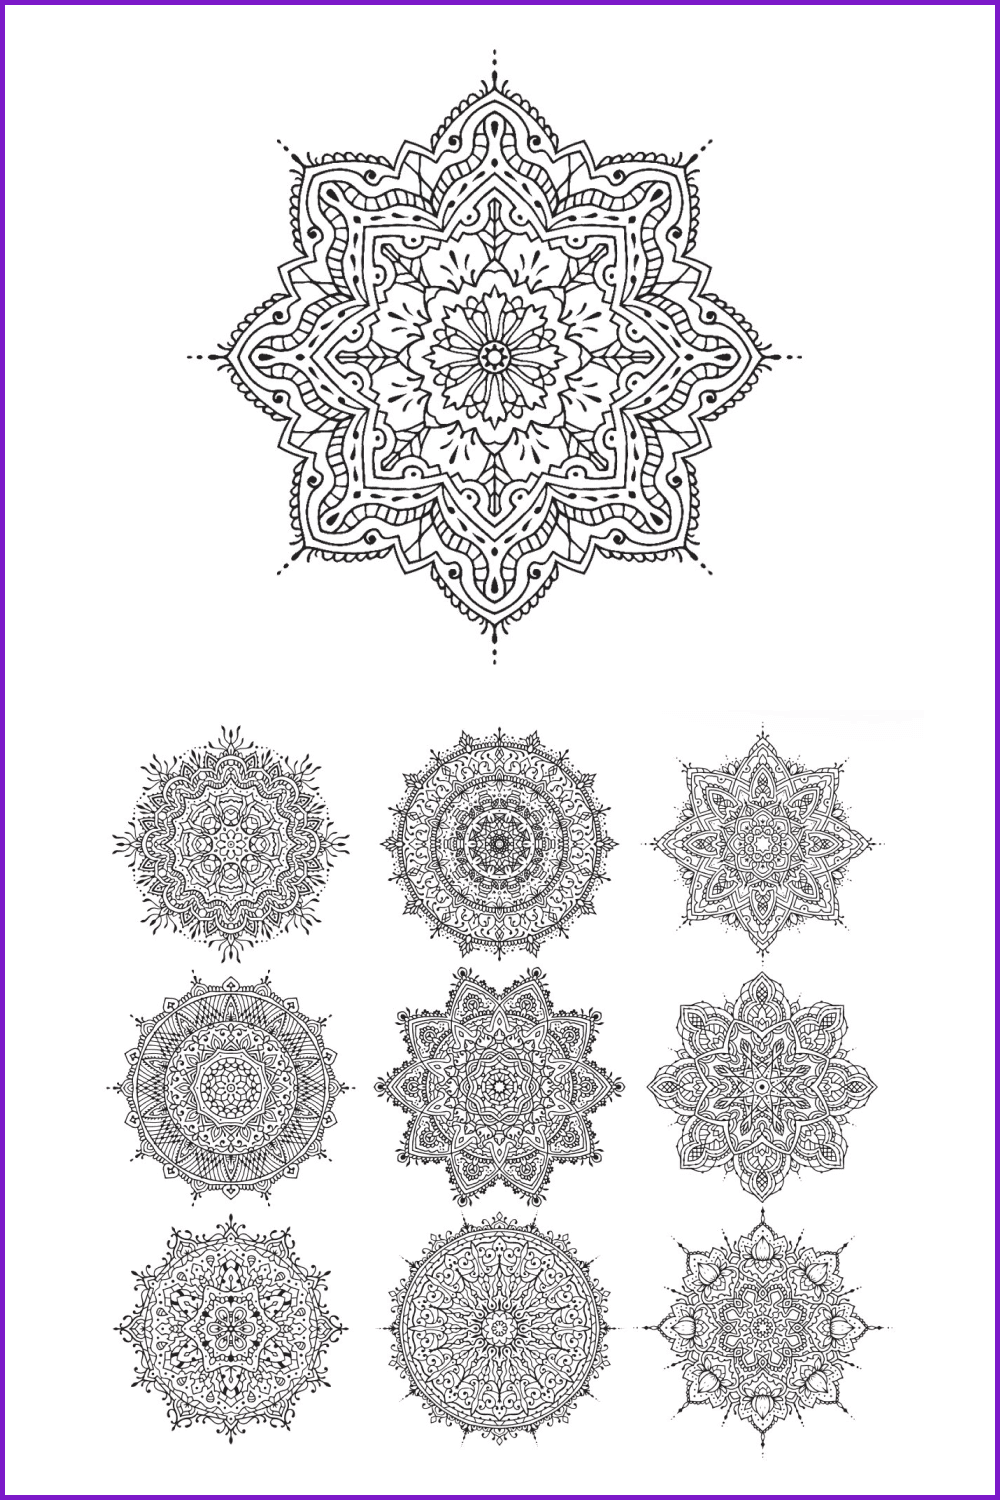 Delicate work to create the mandala. Very exquisite lines create the perfect picture.